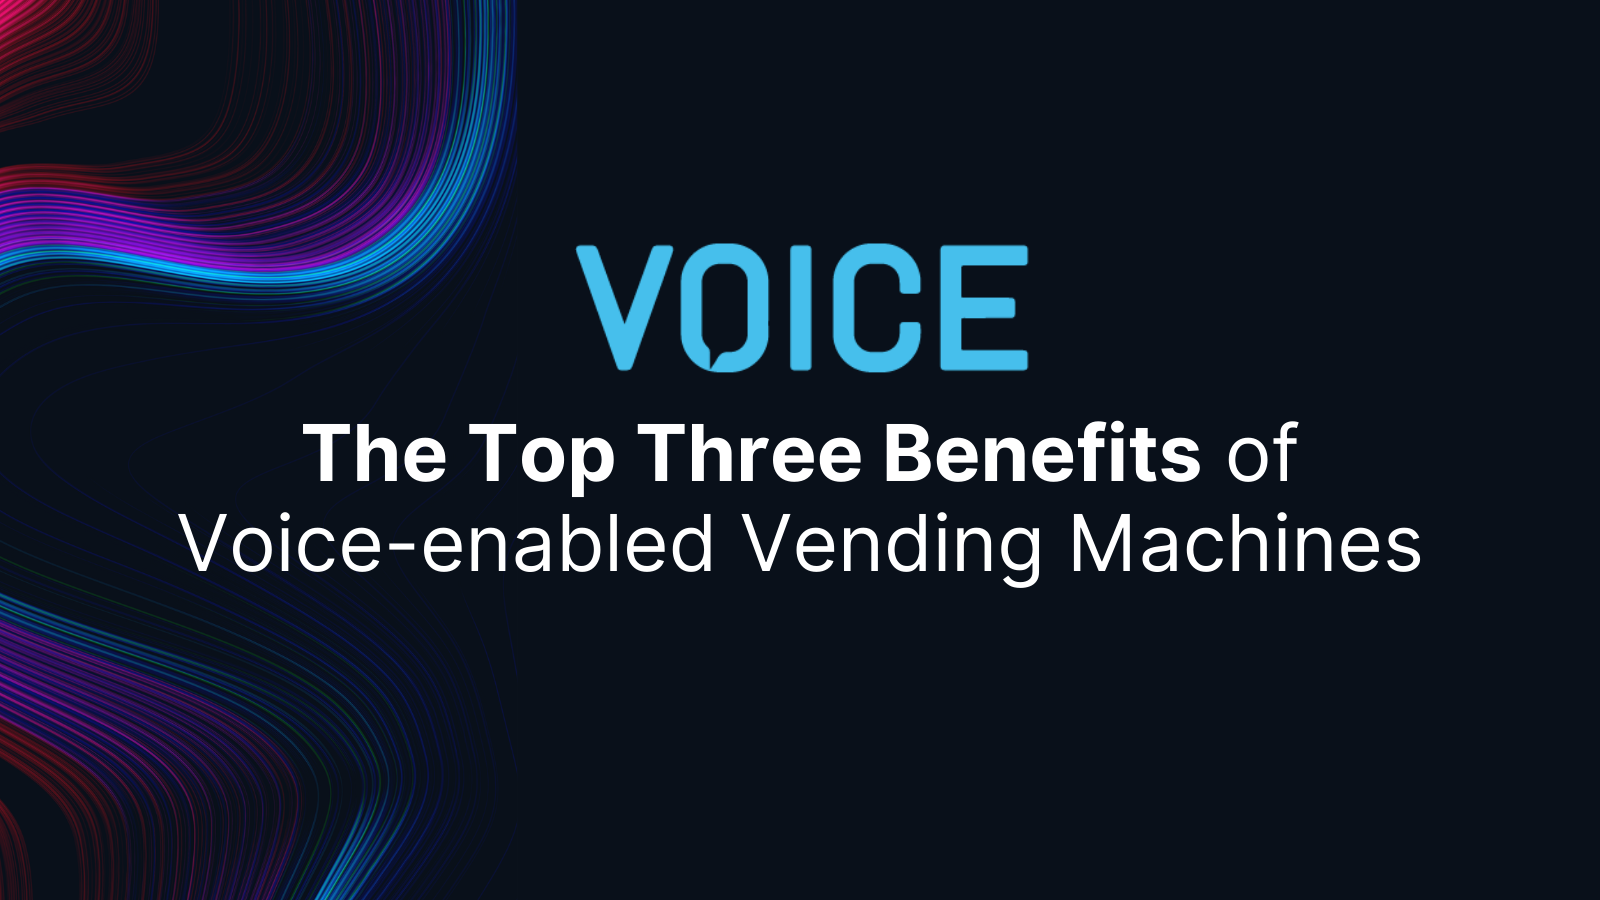 The Top Three Benefits of Voice-enabled Vending Machines